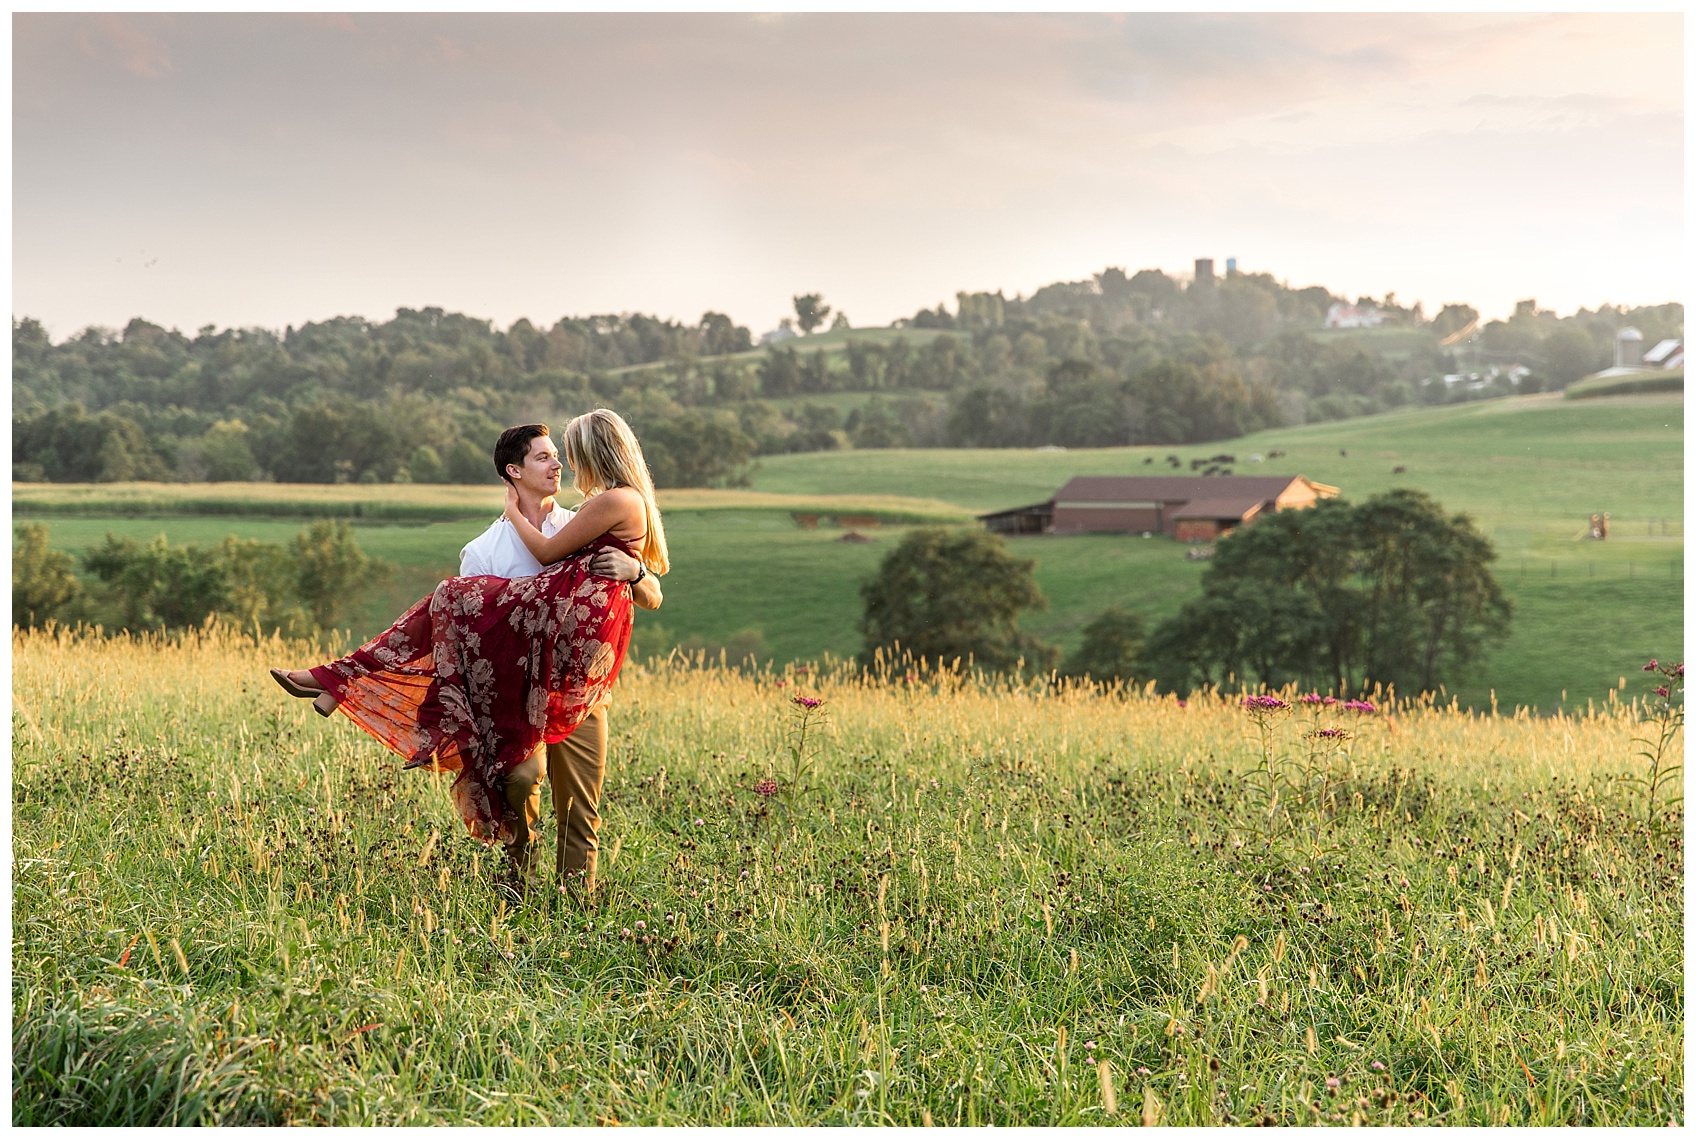 Fiance carrying Bride through Field